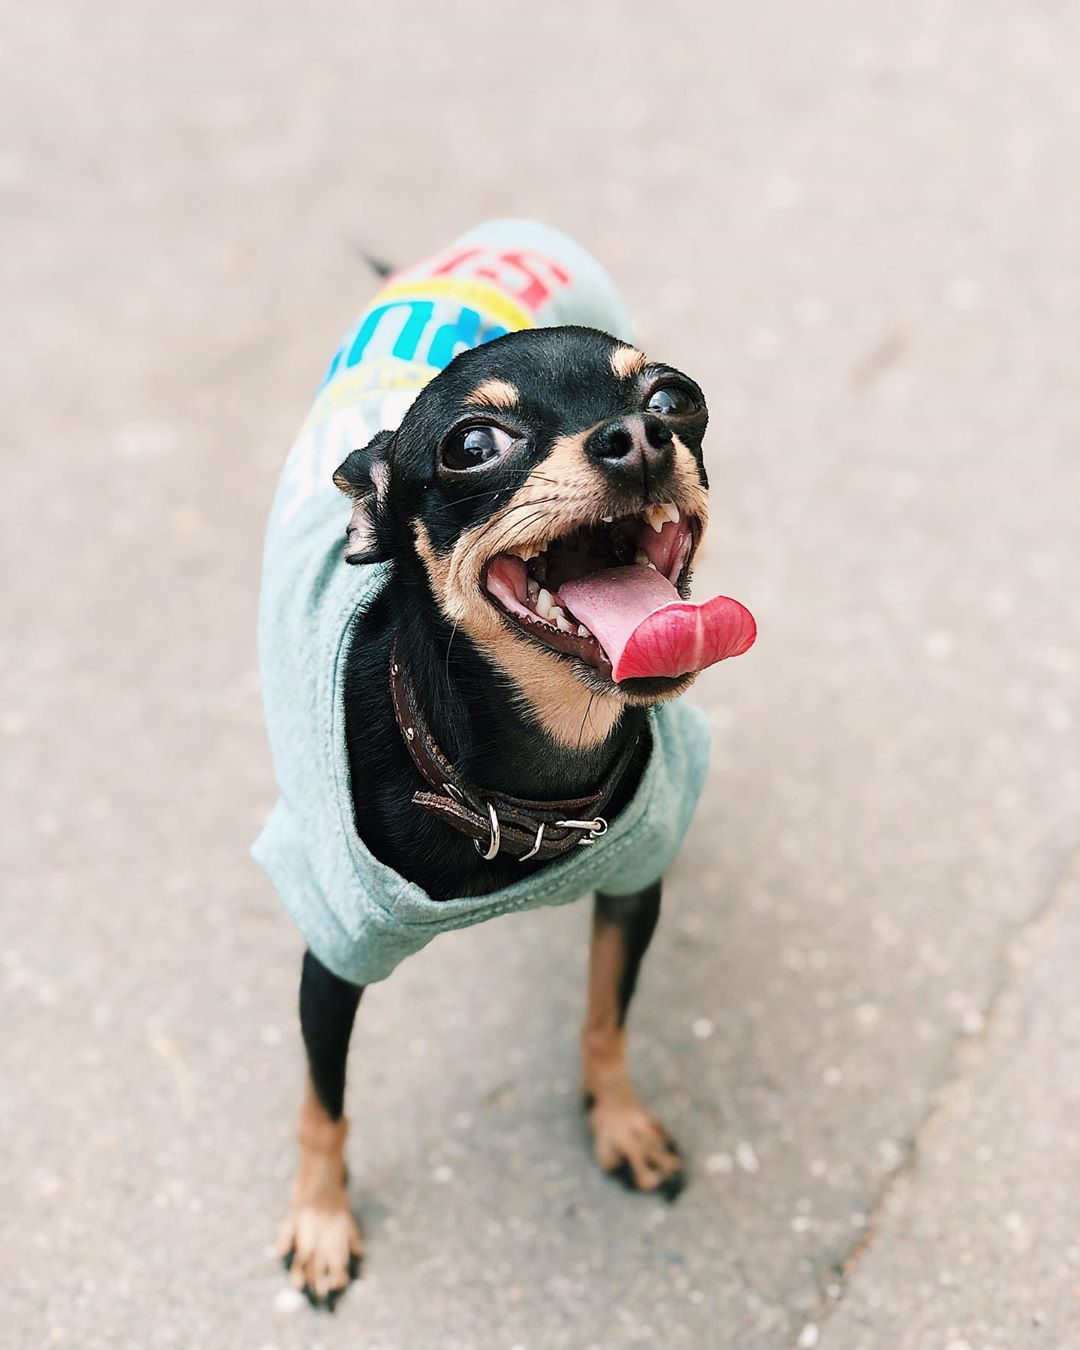 A Toy Fox Terrier wearing a shirt while standing on the pavement and smiling with its tongue out